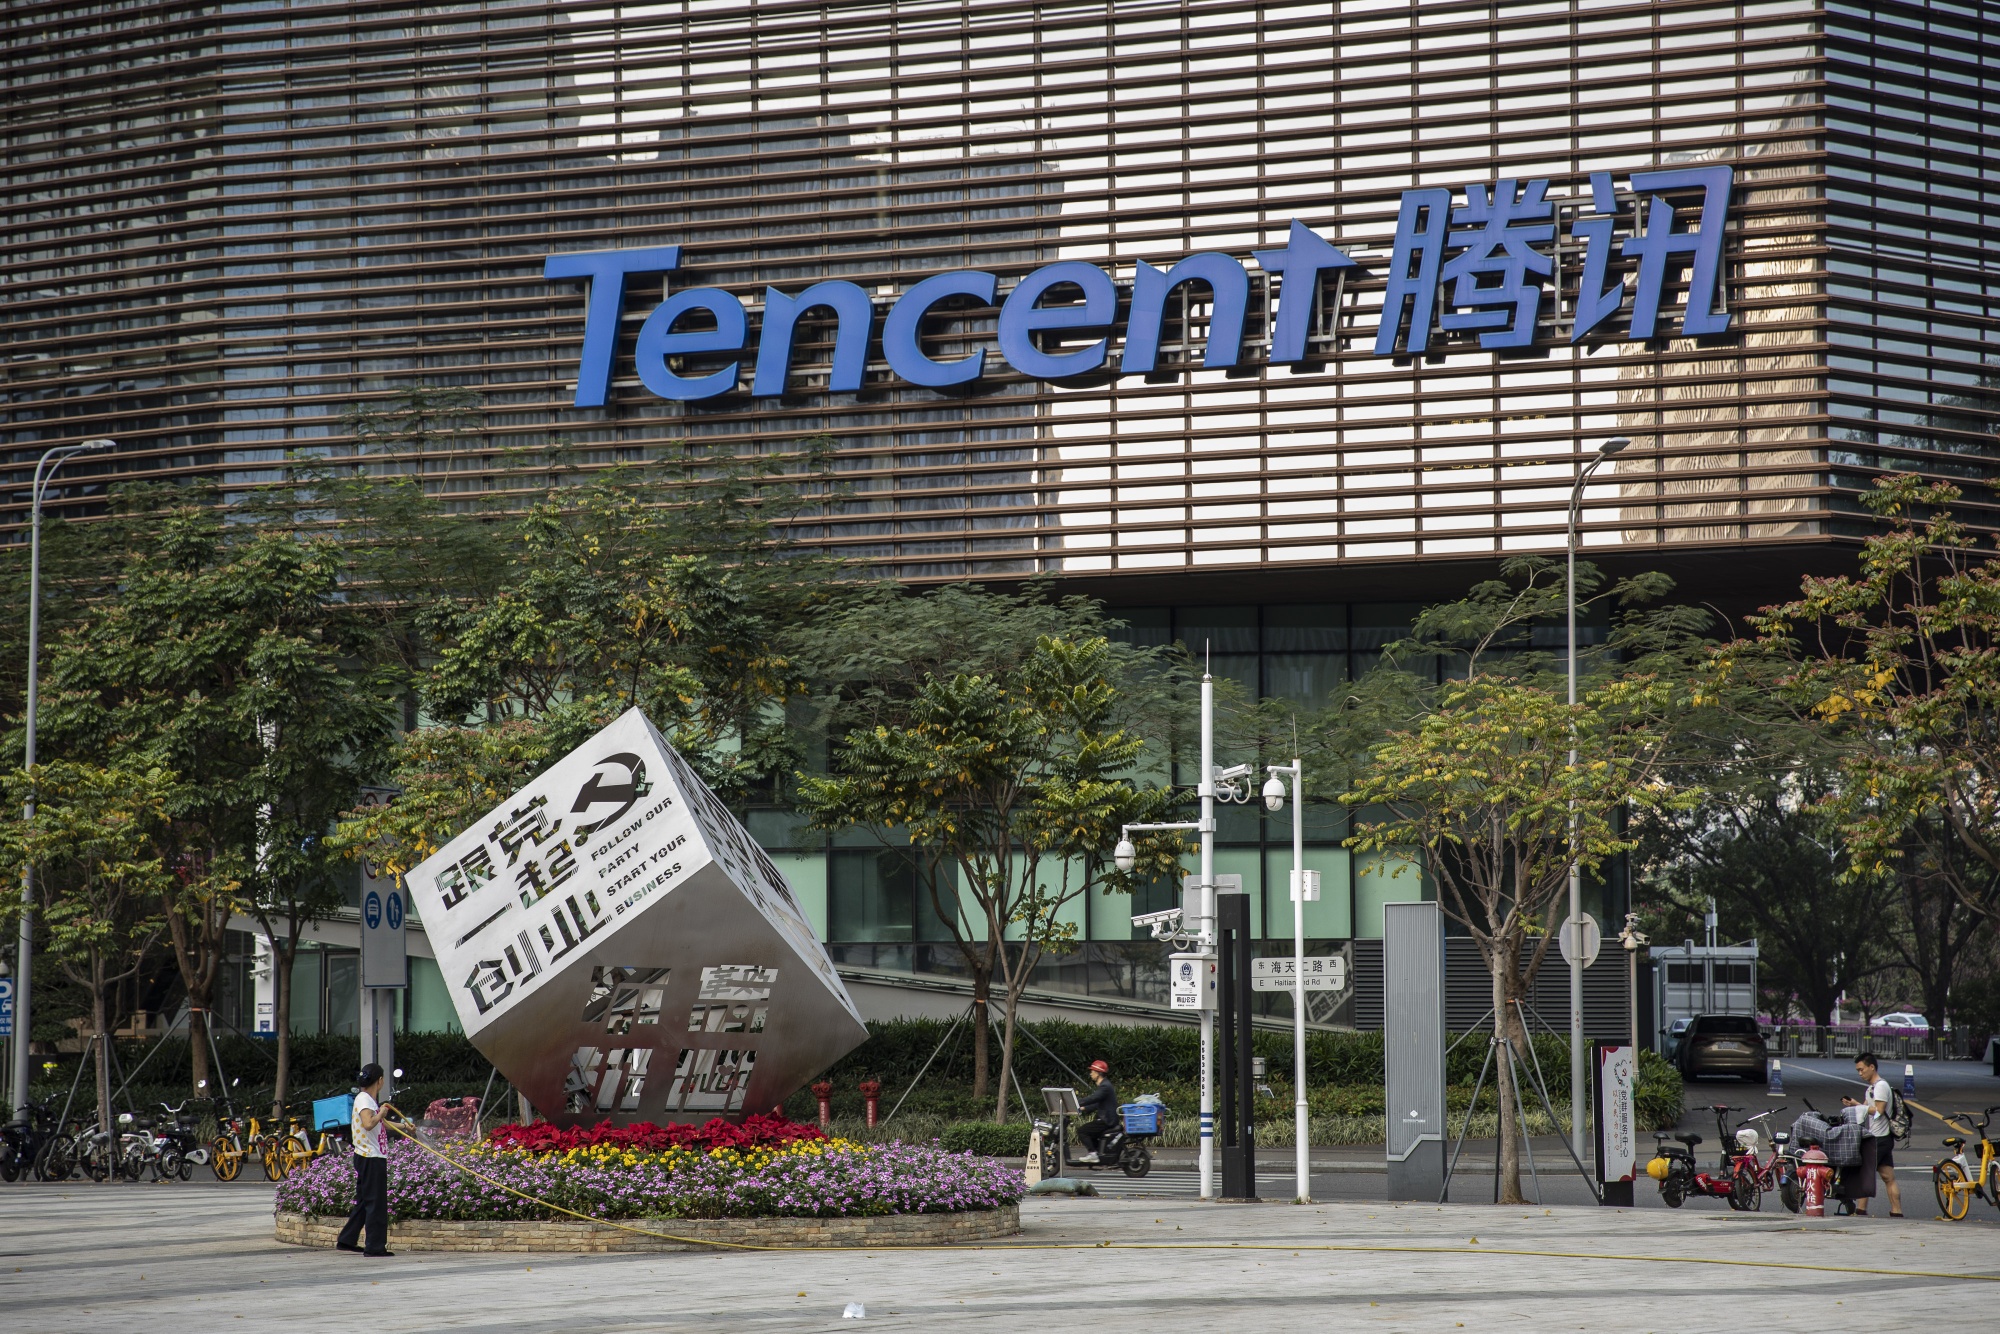 Shares of Tencent experienced a turbulent year. Revenues and profit increased substantially in the first quarter